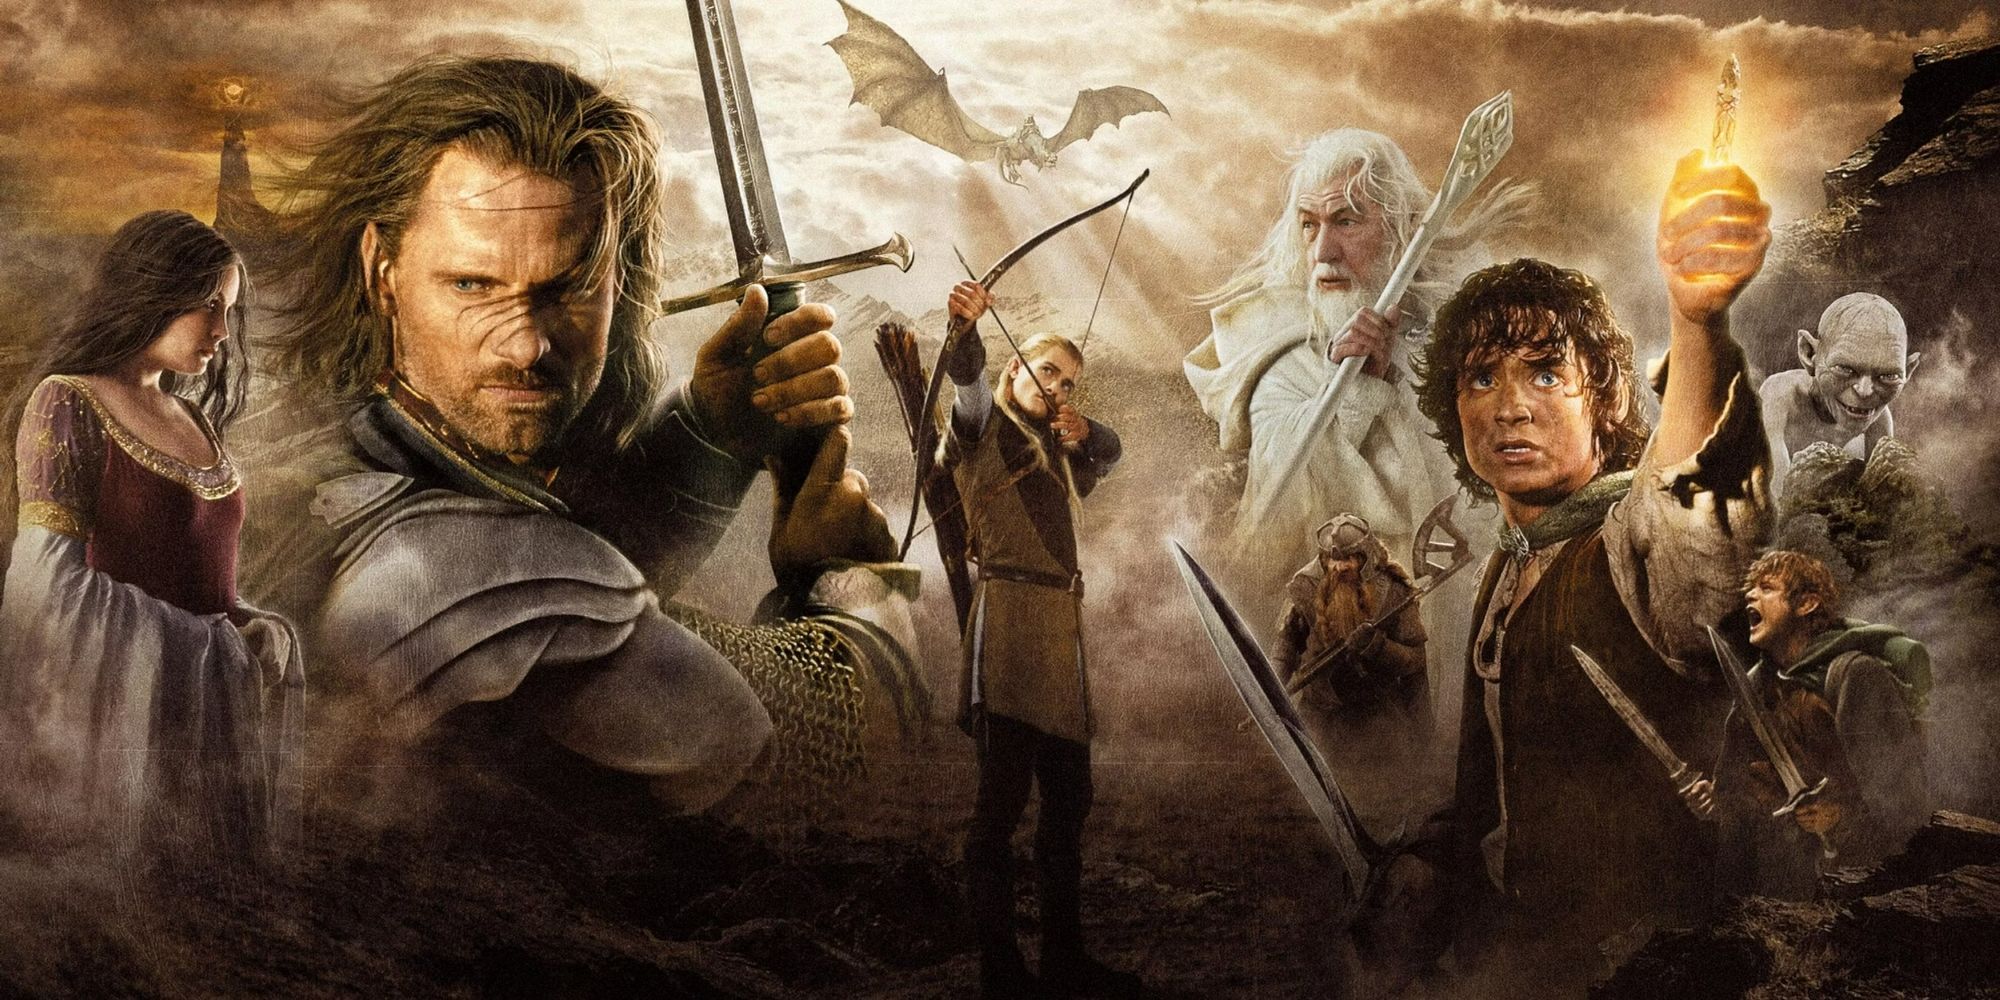 LORD OF THE RINGS AKA THE GREATEST FILMS AND BOOKS EVER Cropped (1)